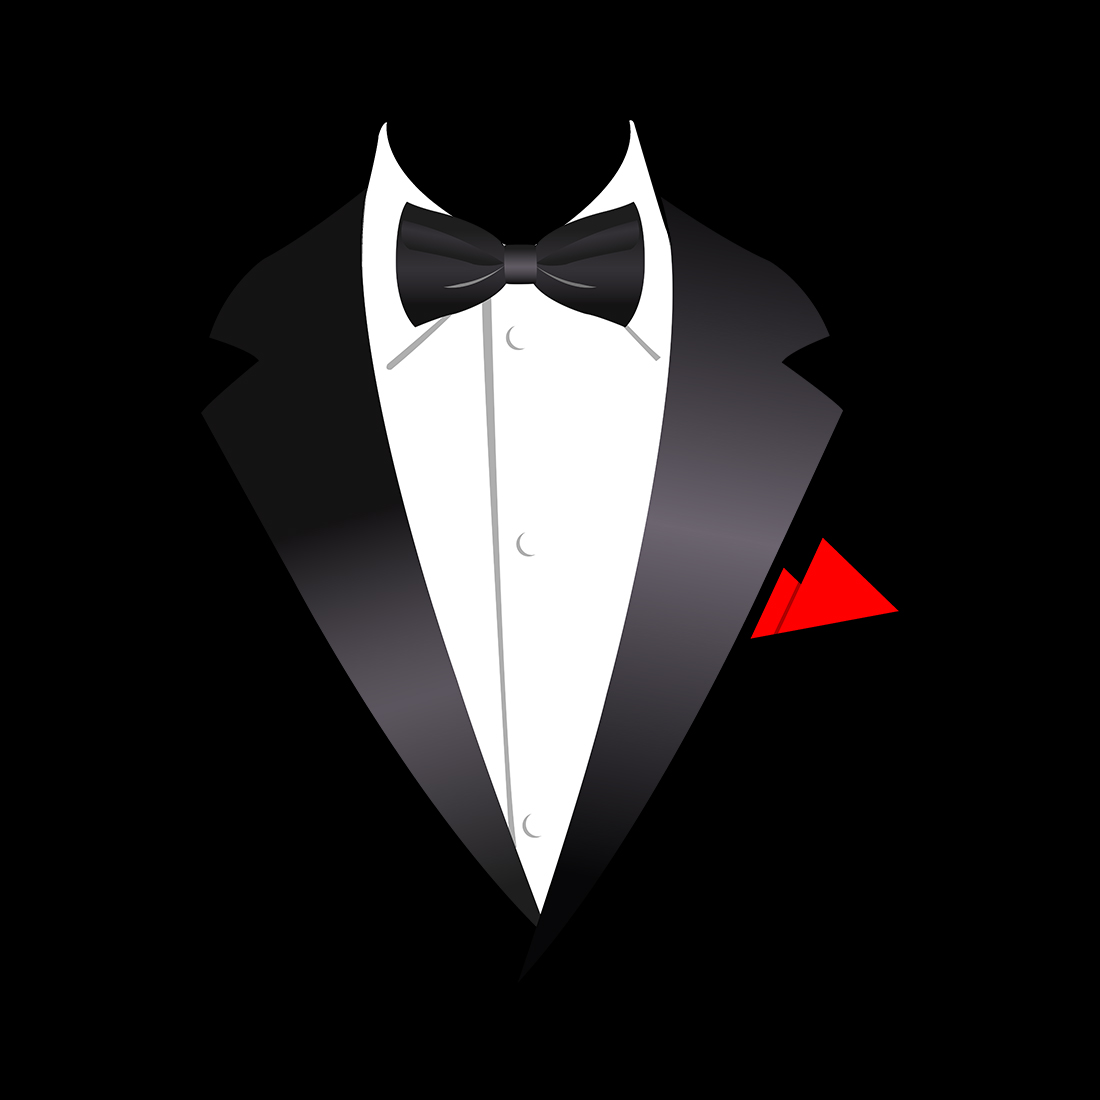 Details About Iamtee Tuxedo T Shirt Classic Black Bow Tie Red Hanky